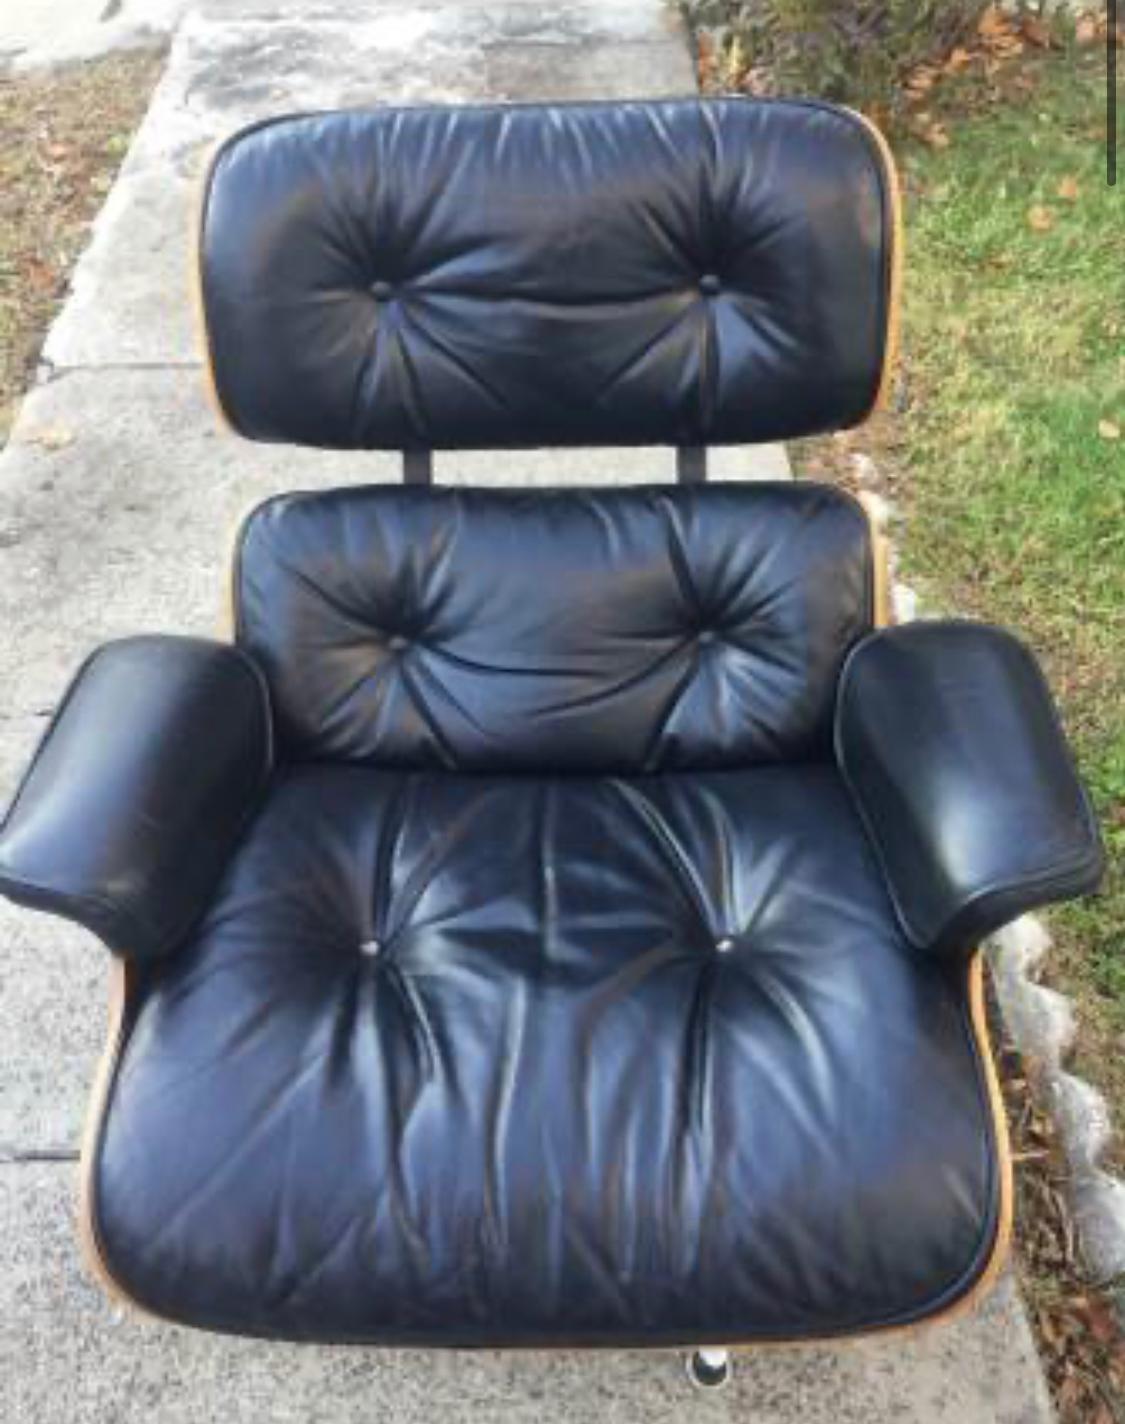 Gorgeous vintage classic Herman Miller Eames lounge chair and ottoman. Signed on chair and ottoman. Lovely wood grain texture and vibrant color. Leather in great shape.